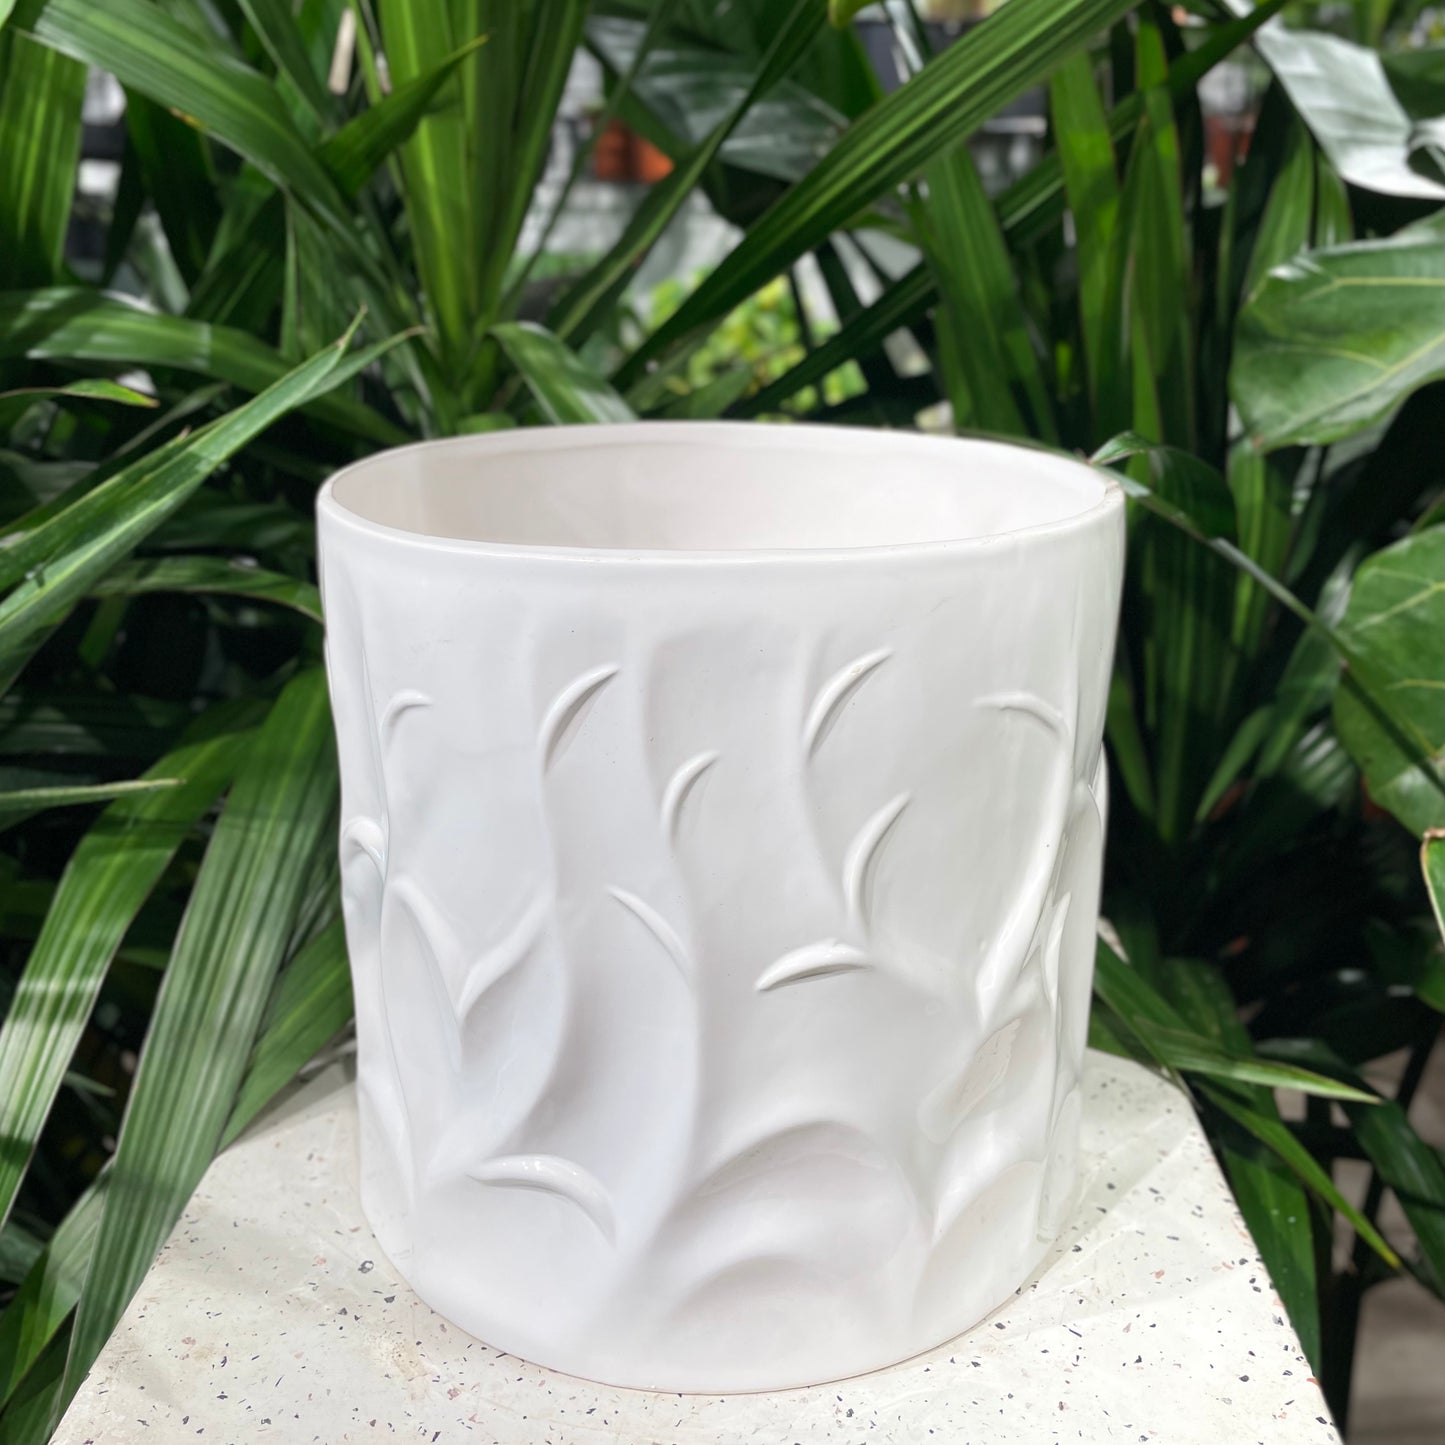 Musta White Planter Fits up to 10 inch Nursery Pot